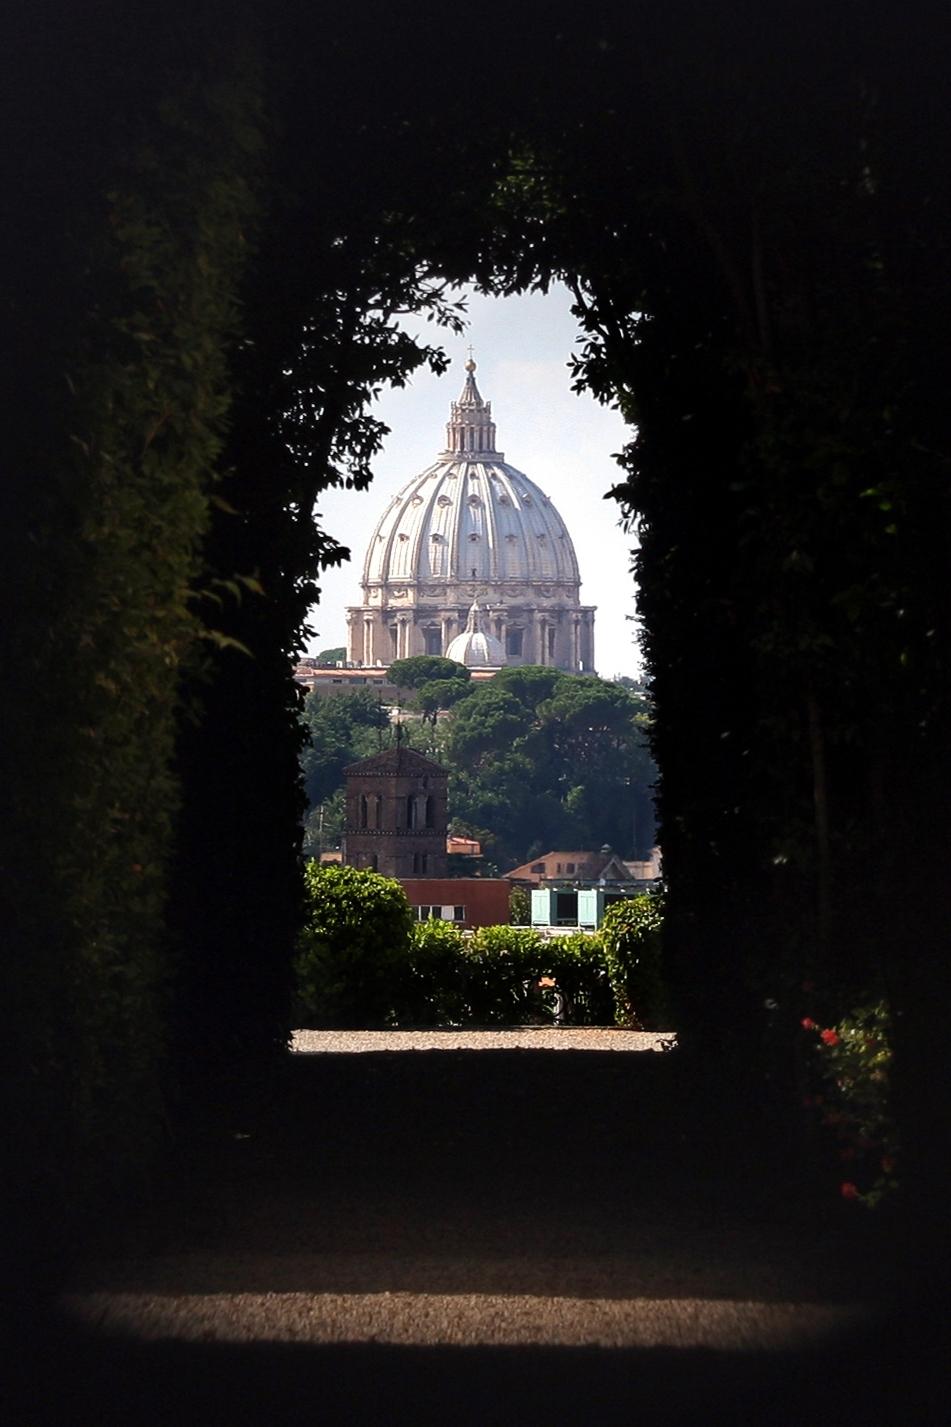 Cover image of this place Rome's Keyhole